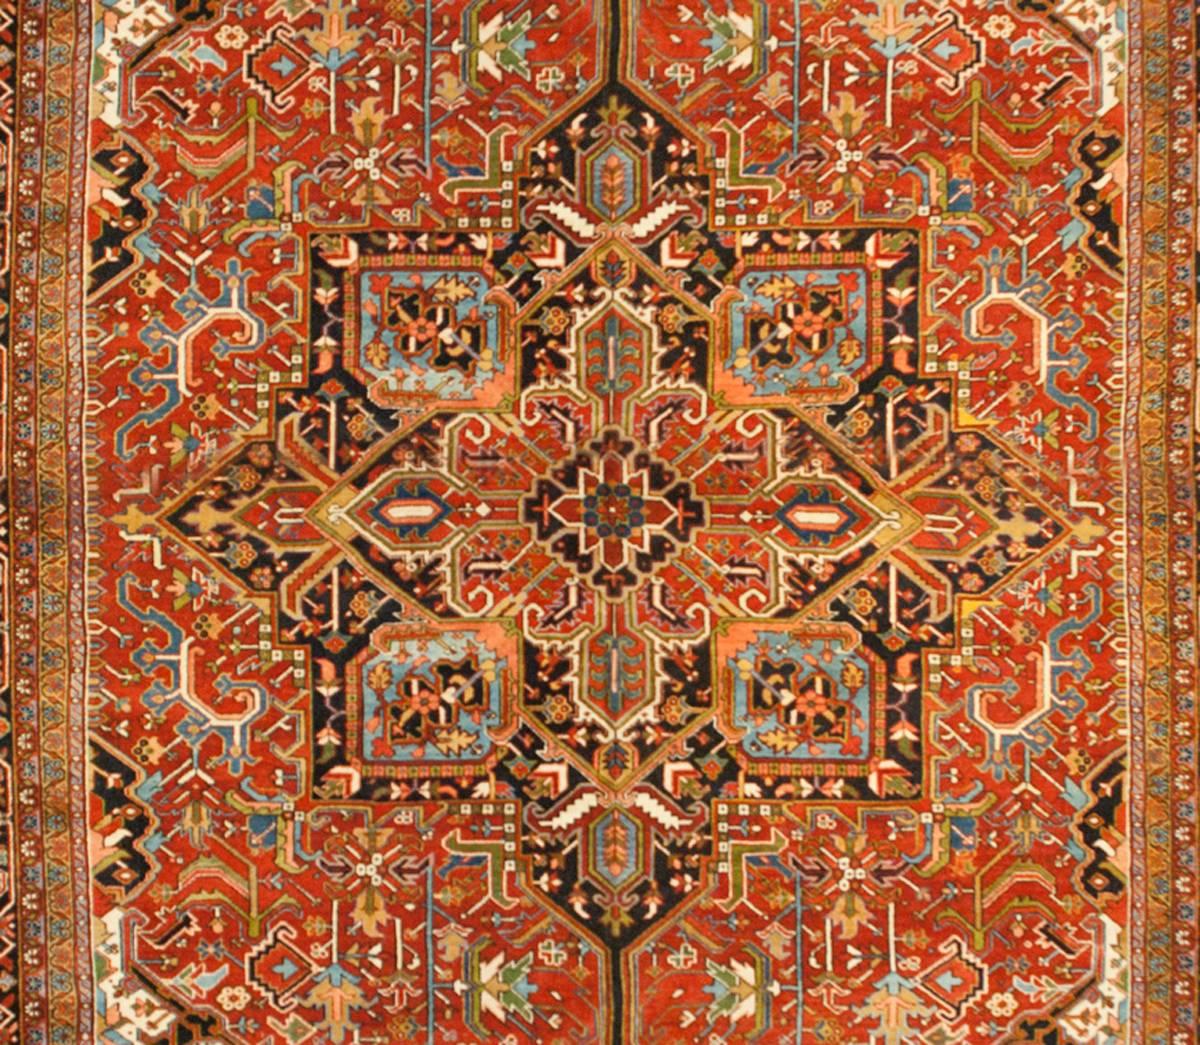 A wonderfully bold early 20th century Persian Heriz rug with a large central multicolored medallion woven in richly saturated crimson, lime green, light and dark indigo, and white wool. The field is intensely woven with large and small scale